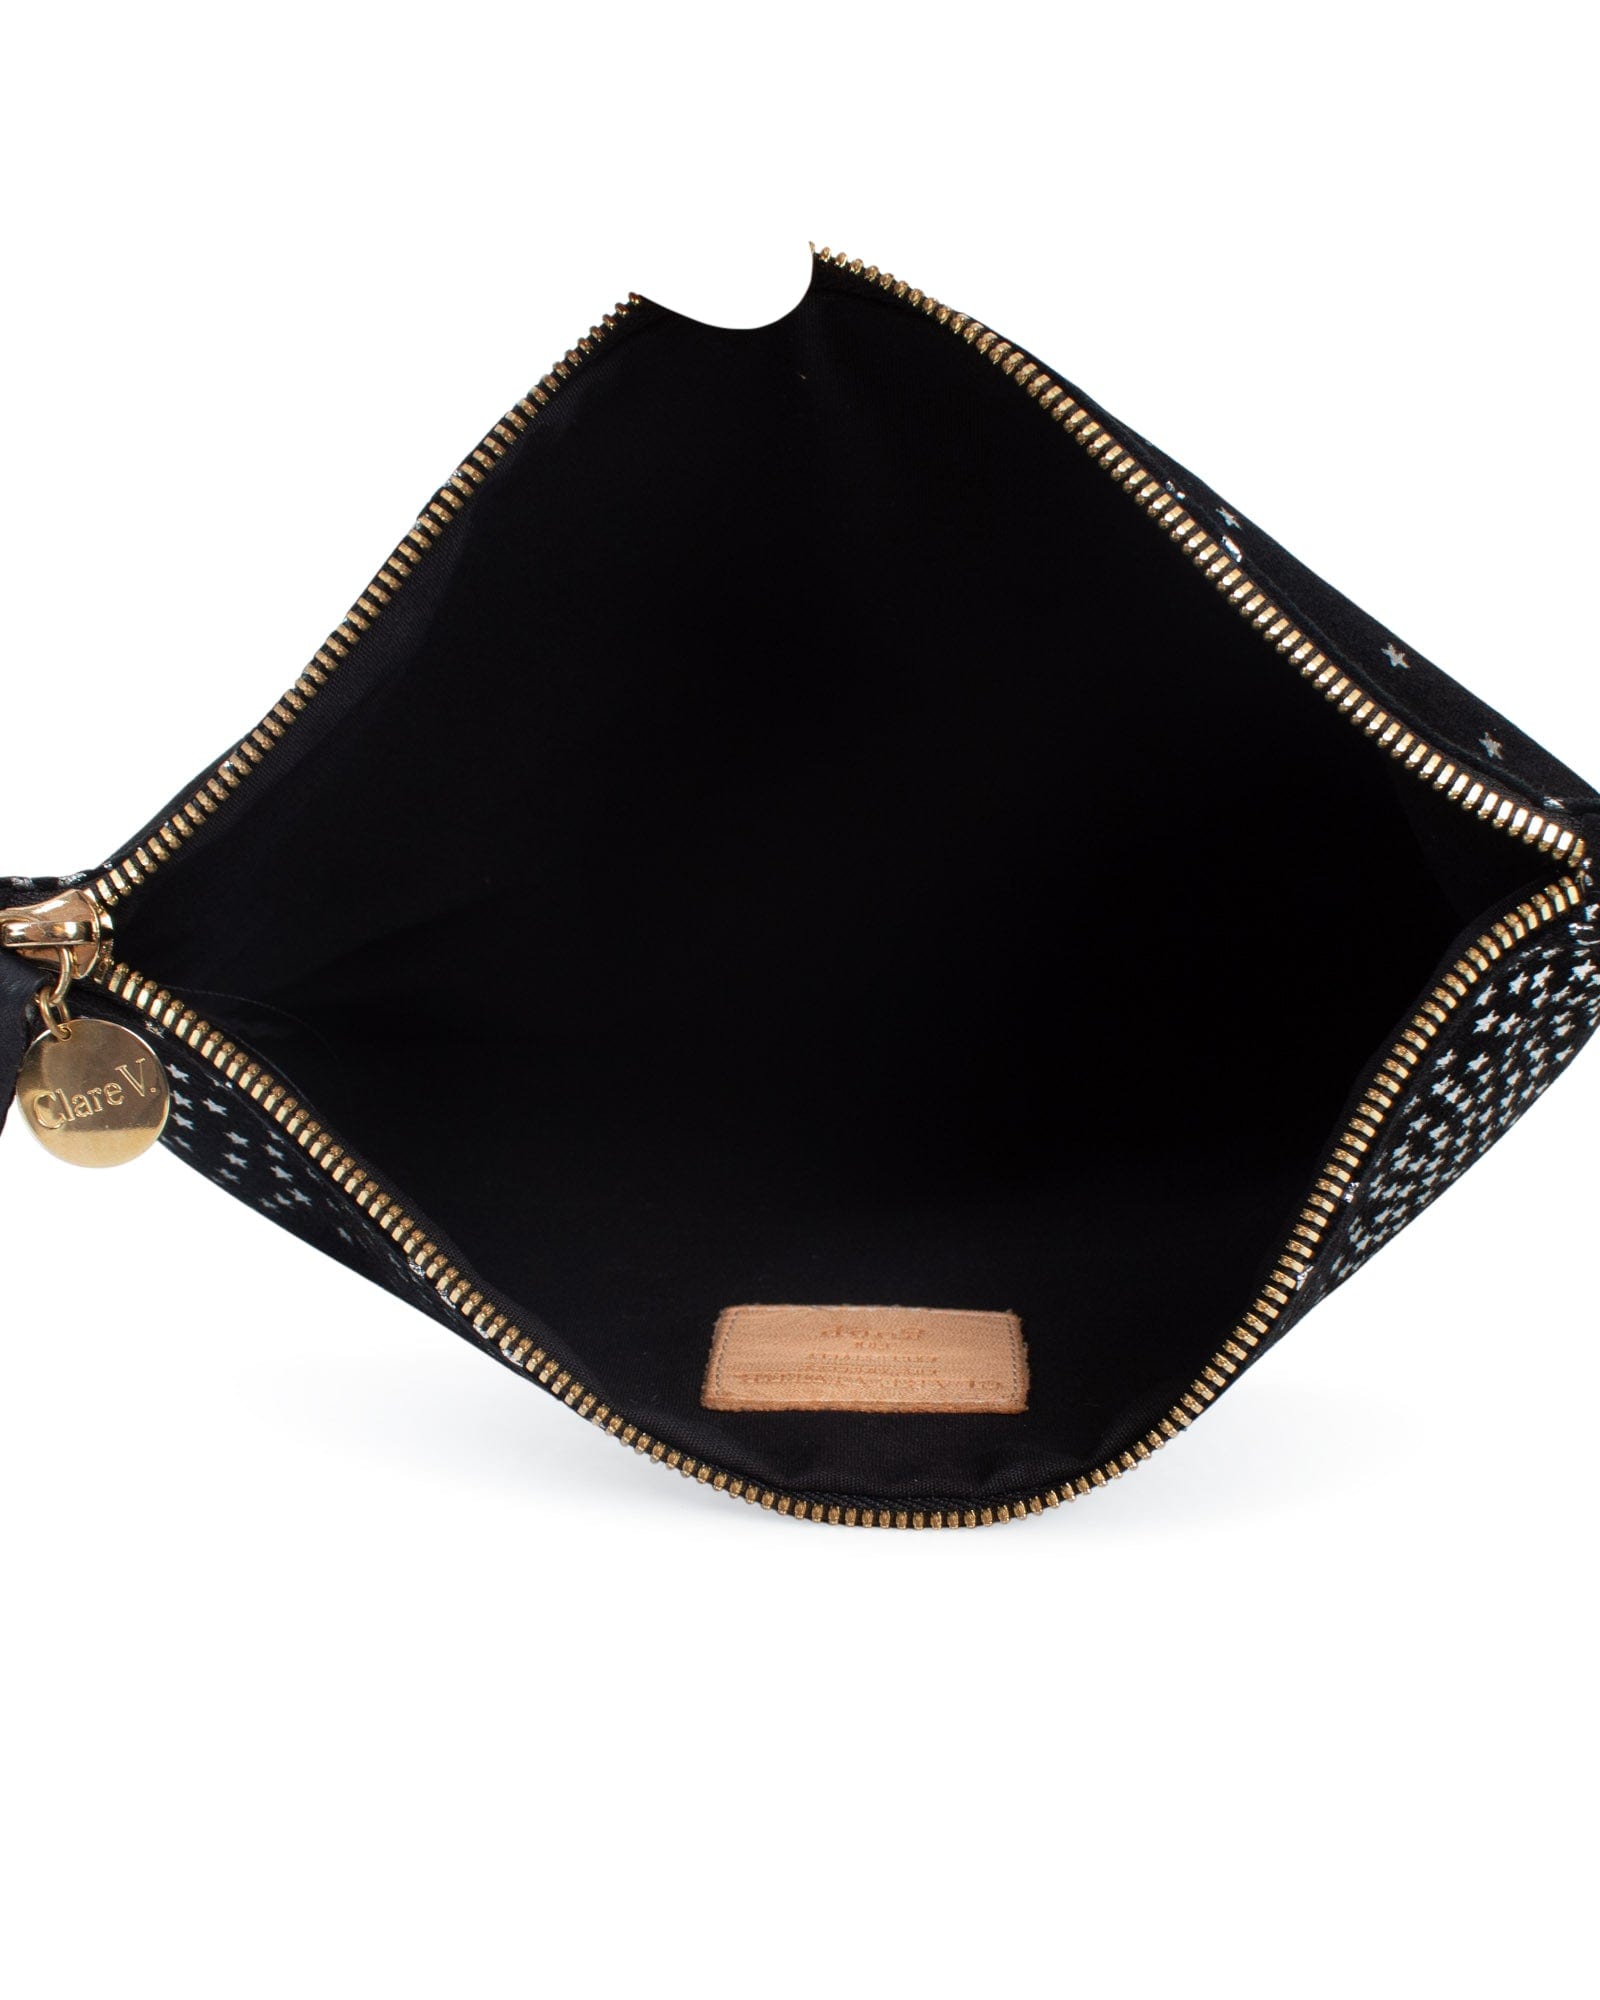 Clare V. Clutches and evening bags for Women